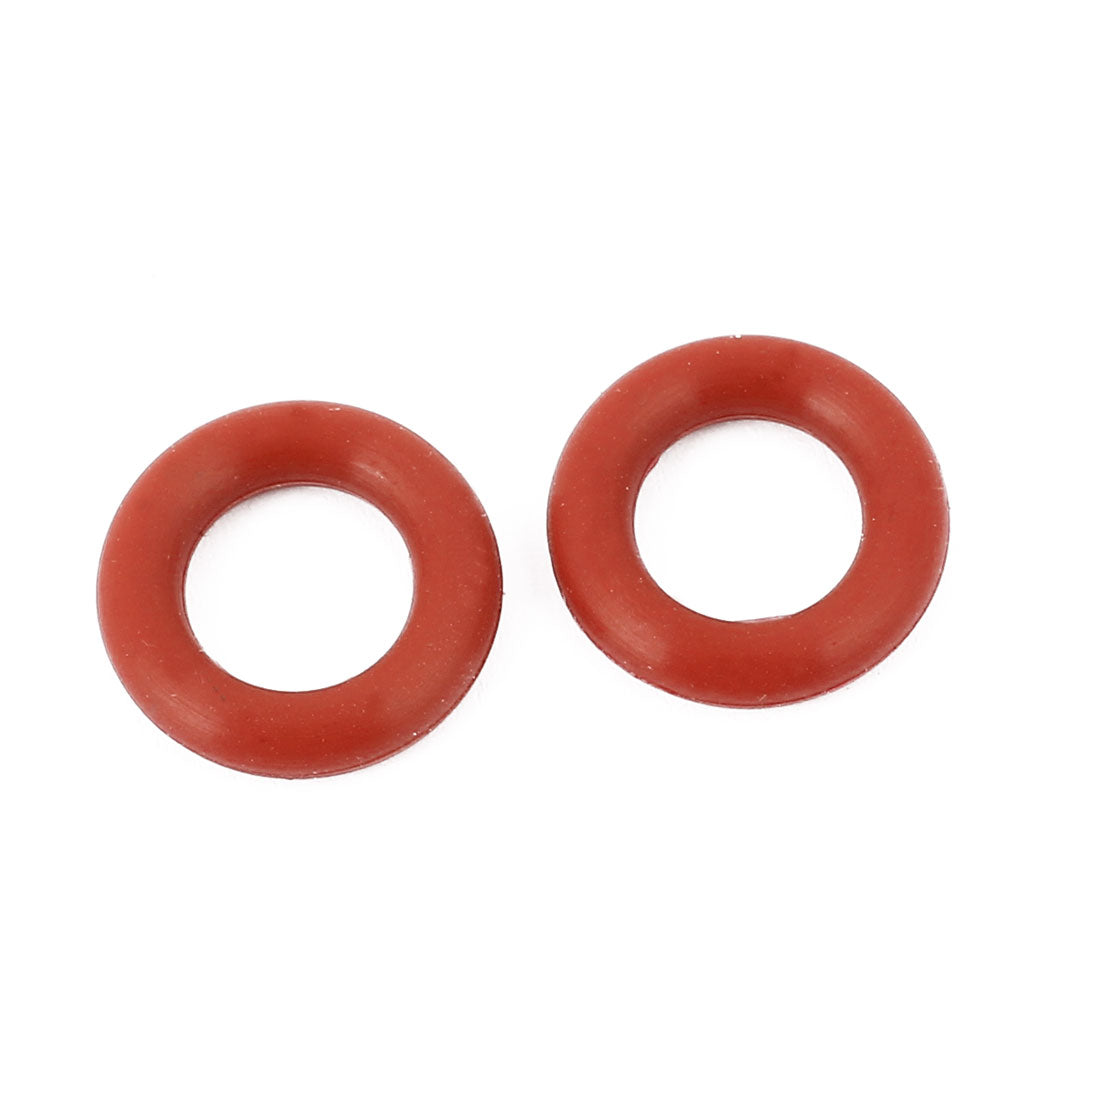 uxcell Uxcell 4pcs 3mm Thick Heat Oil Resistant Mini O-Ring Rubber Sealing Ring 14mm OD Red